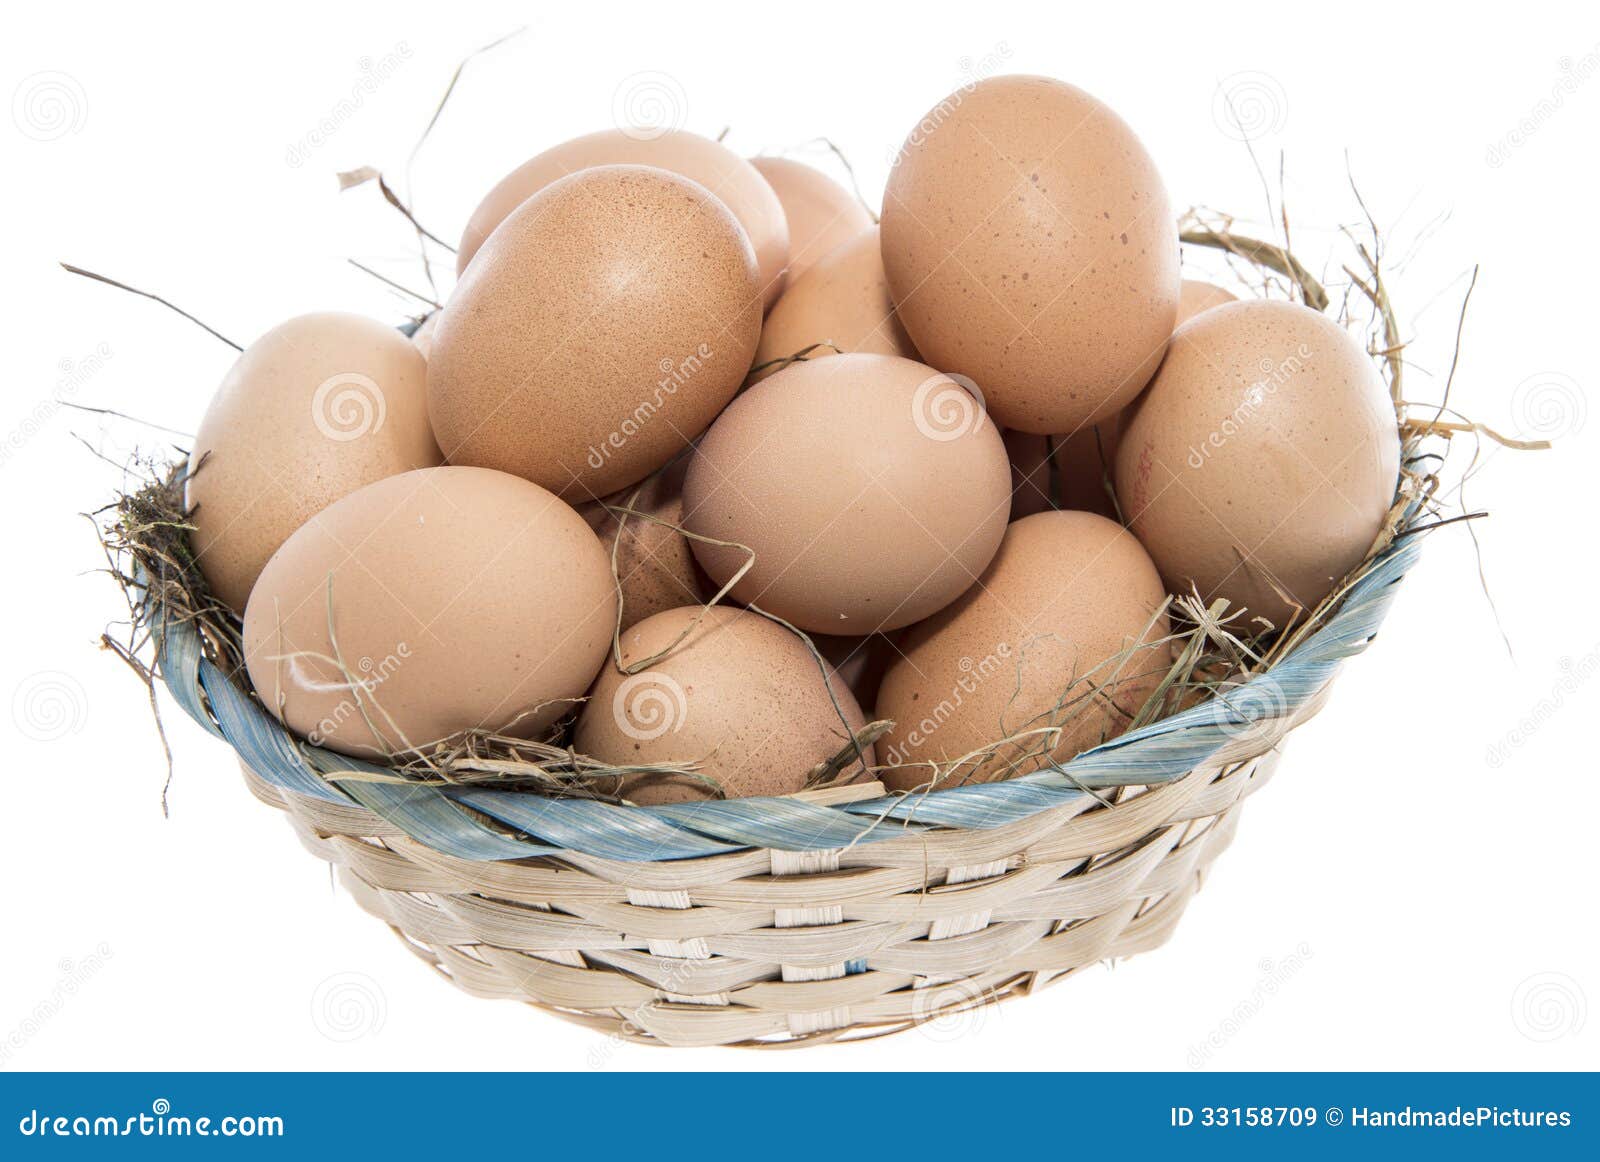 Isolated small package of duck eggs or white shell eggs. Organic